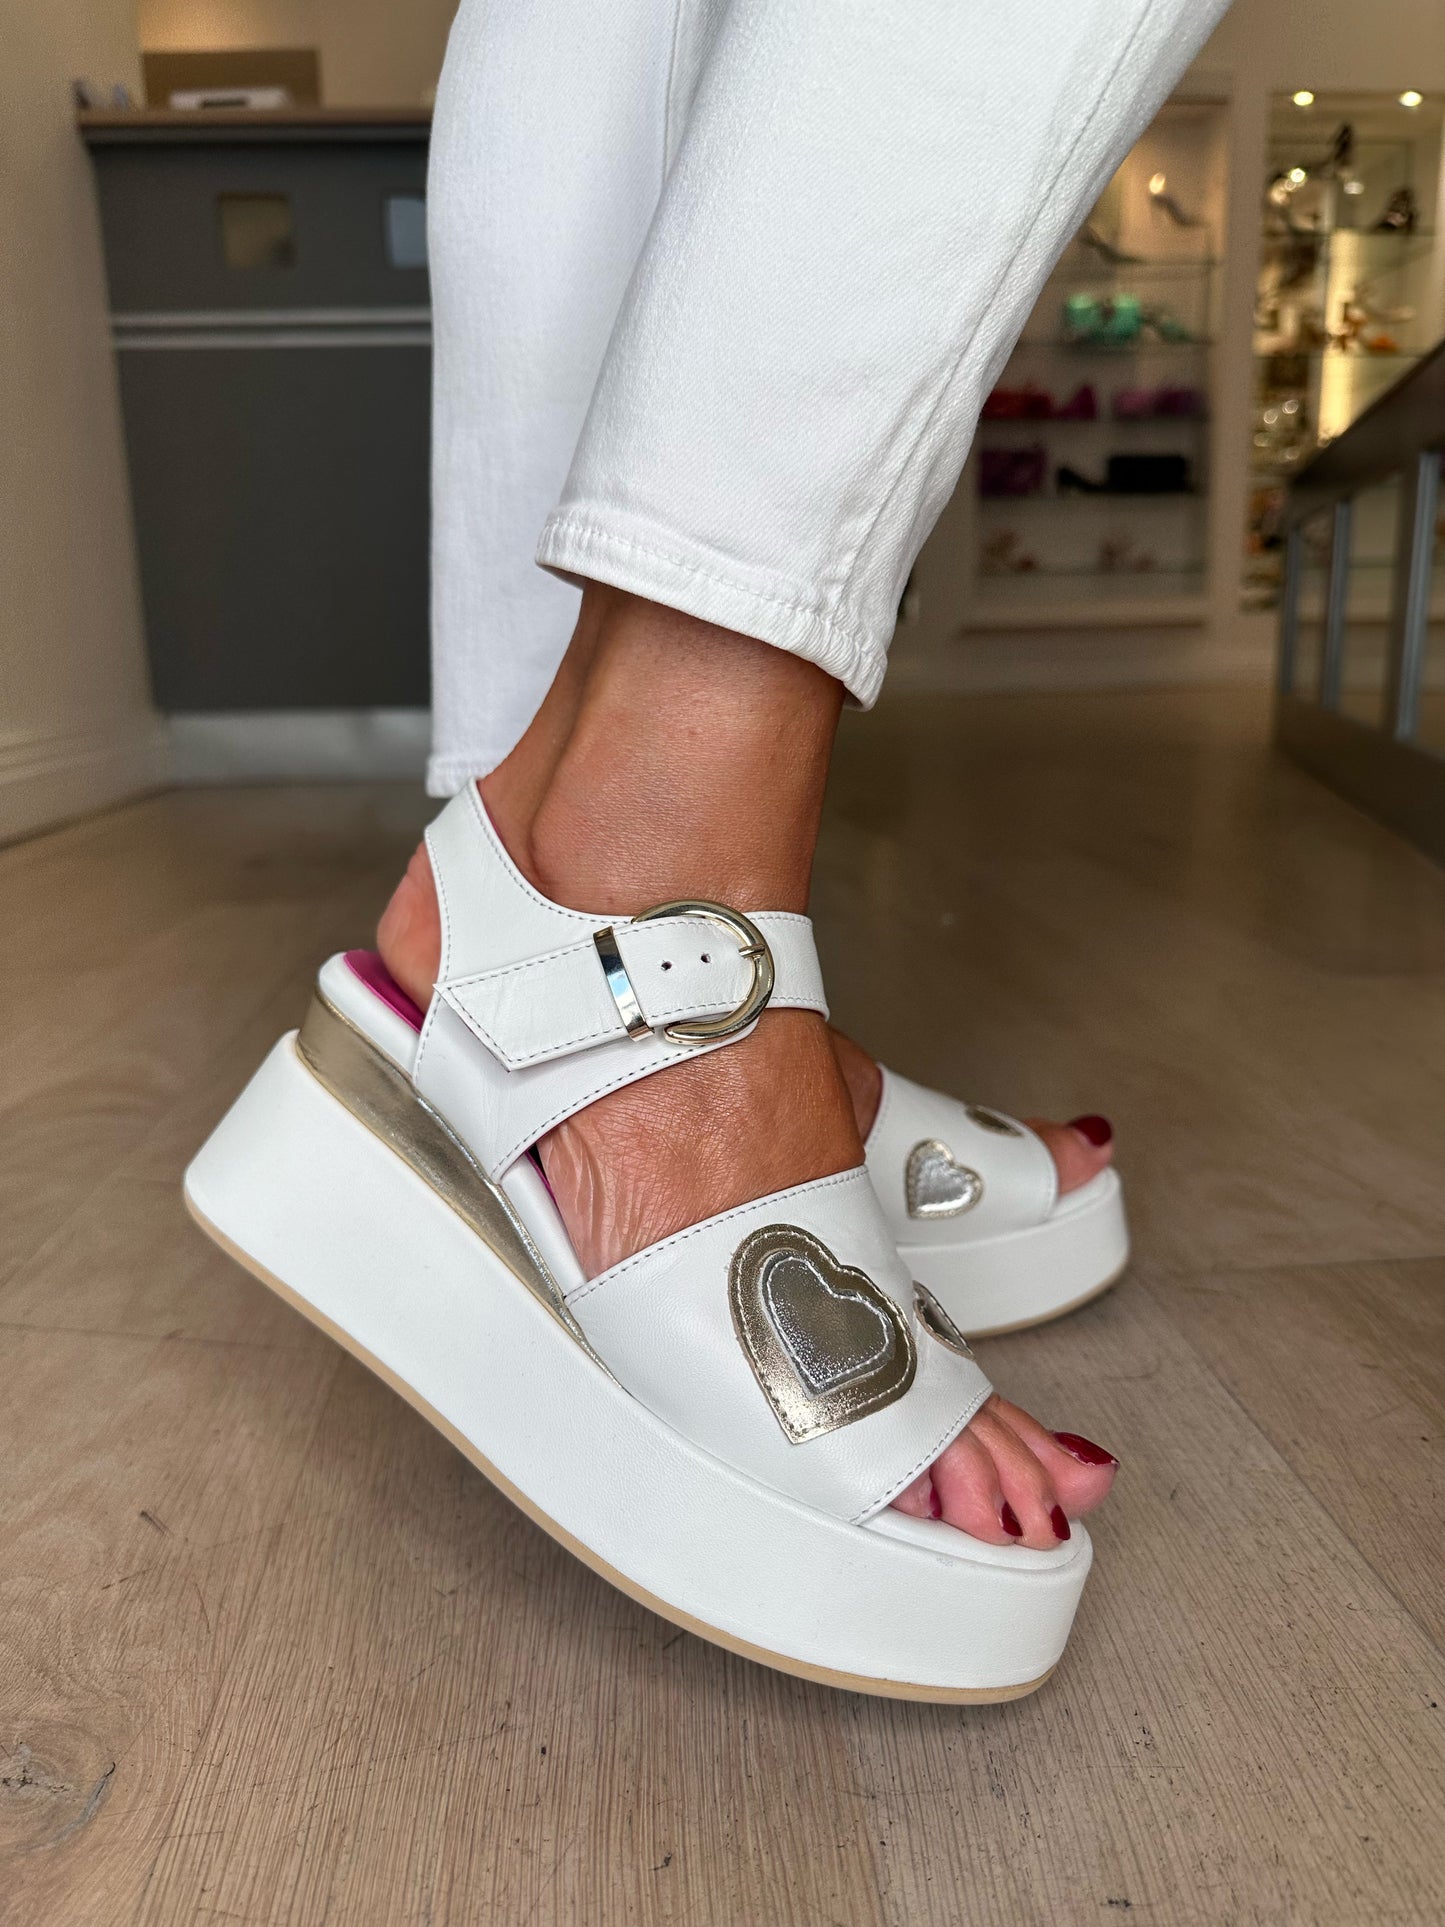 Marco Moreo - White Wedge Sandal With Gold/Silver Hearts